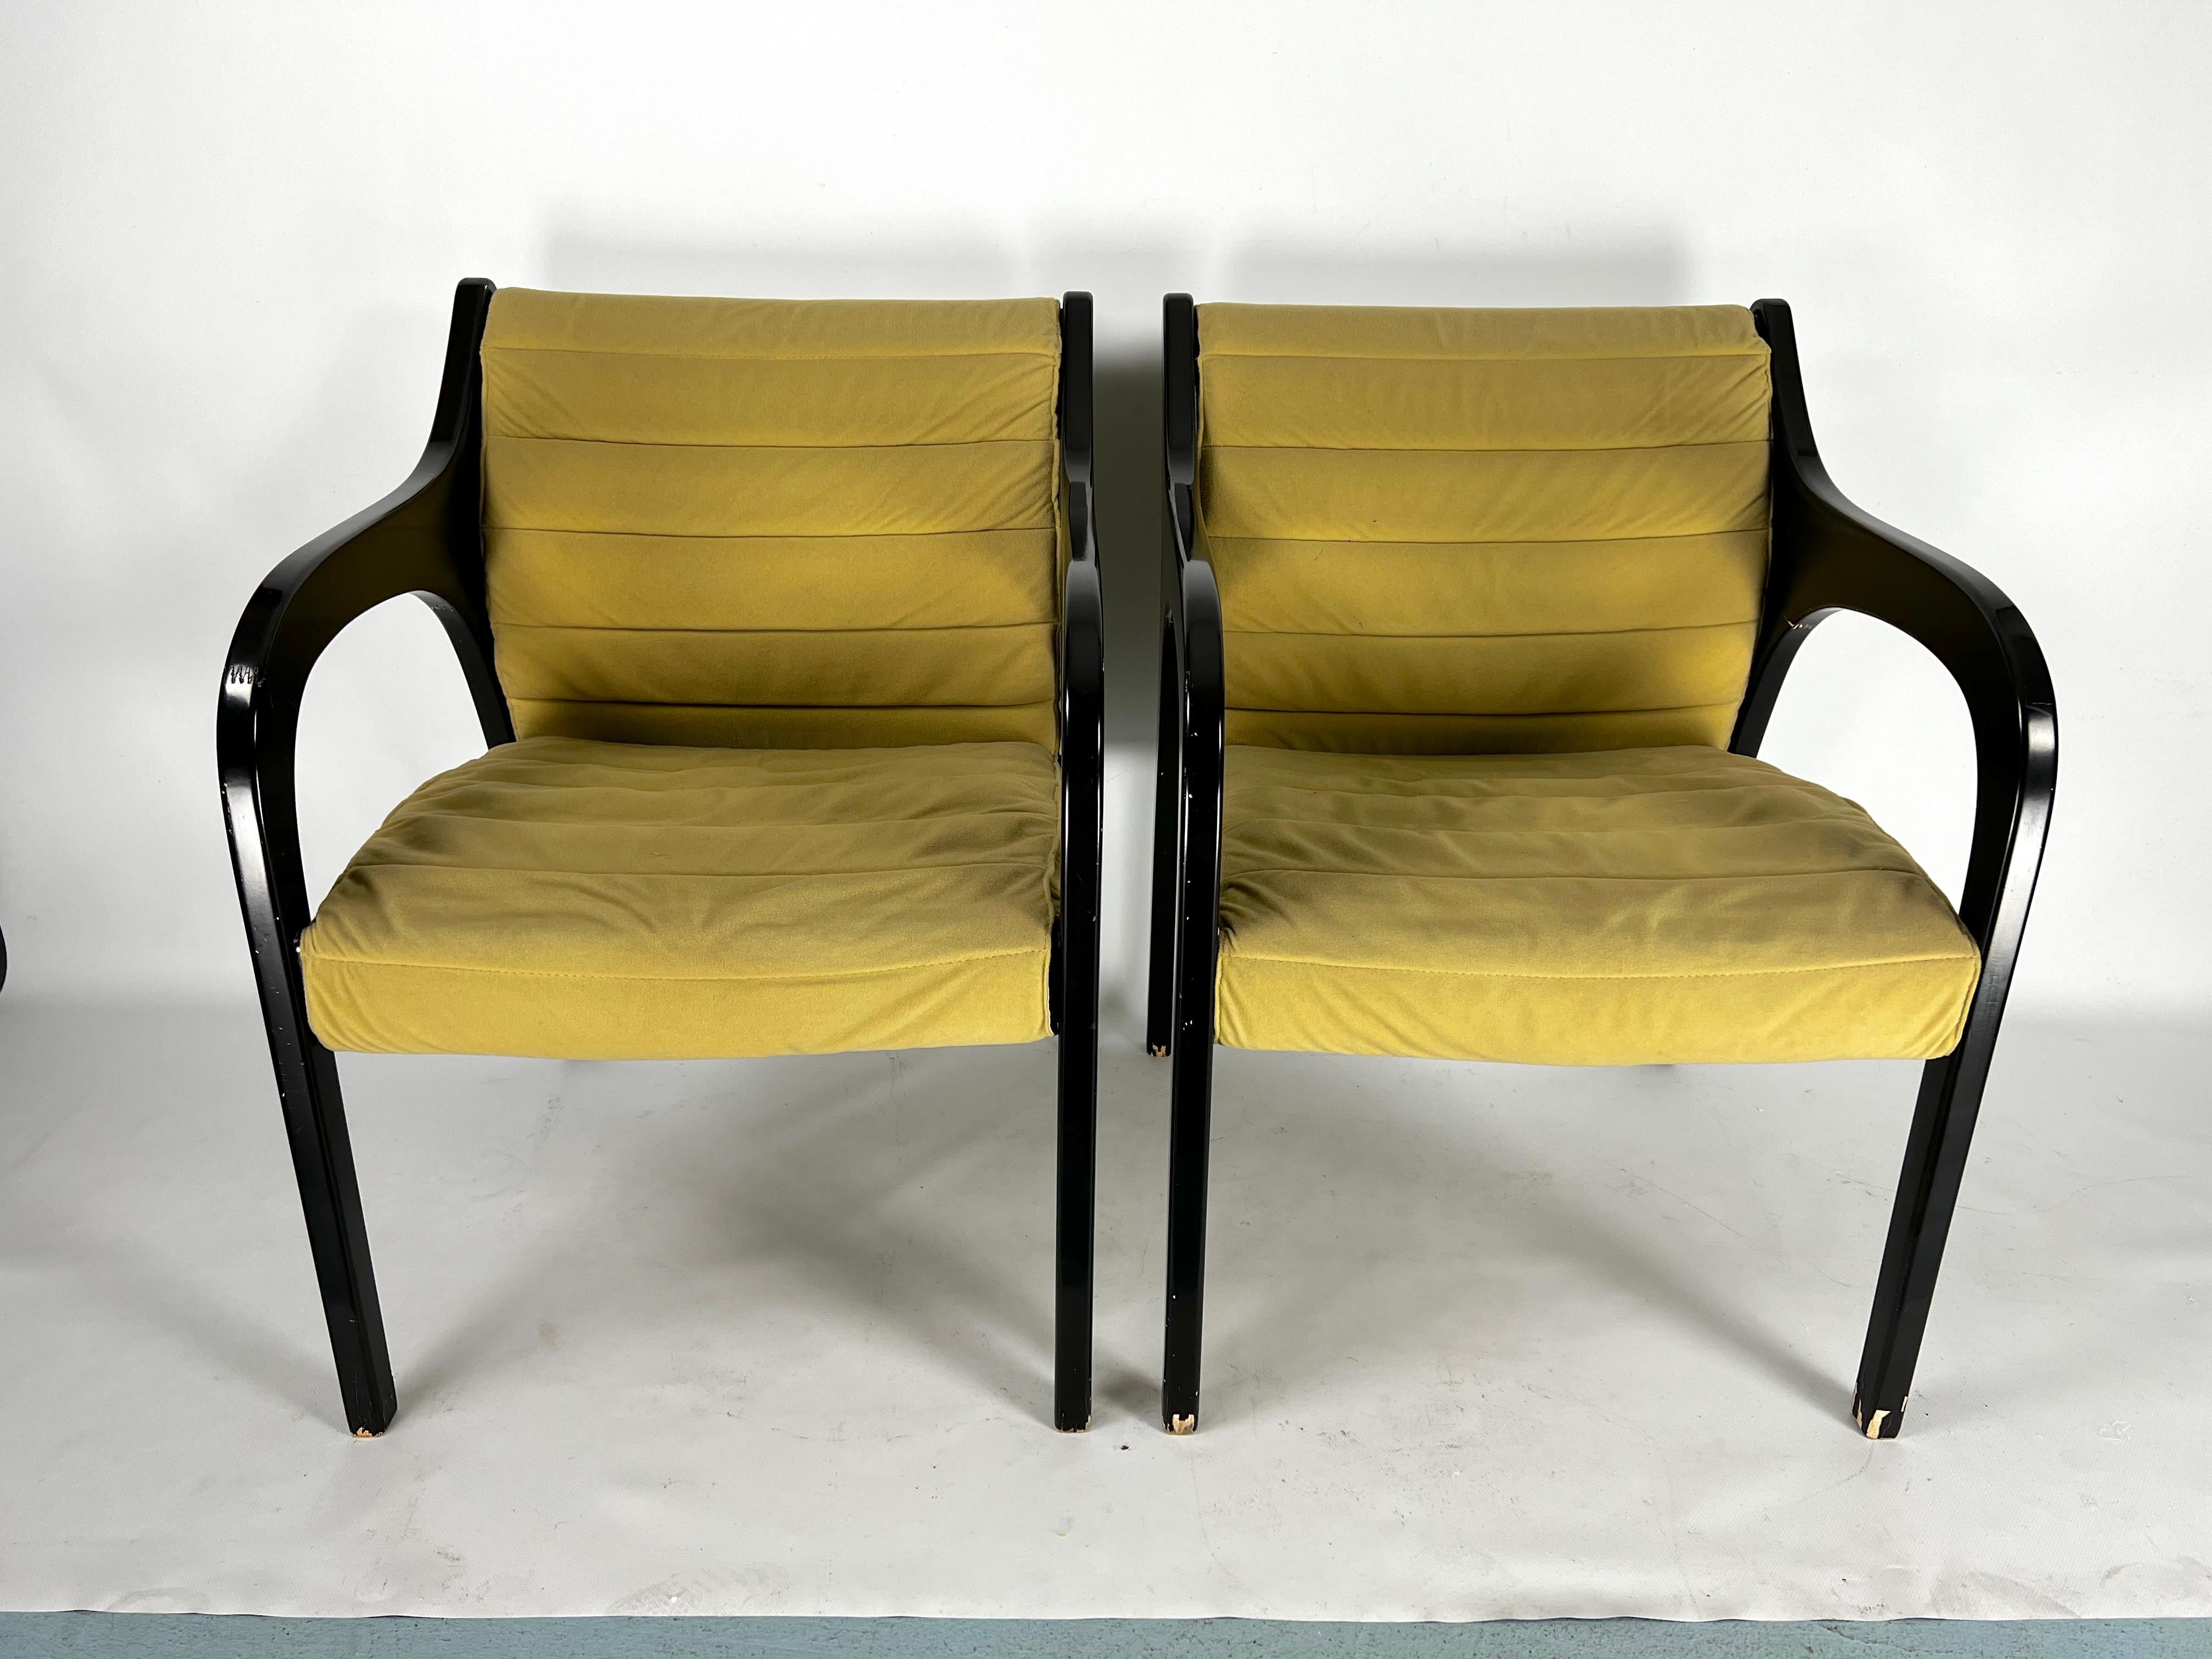 Pair of lounge chairs designed by Claudio Salocchi for Sormani and produced in Italy during the 60s.
Good vintage condition with normal trace of age and use. Some small lack of lacquer, original fabric with no evident defects. Hseat 44 cm.